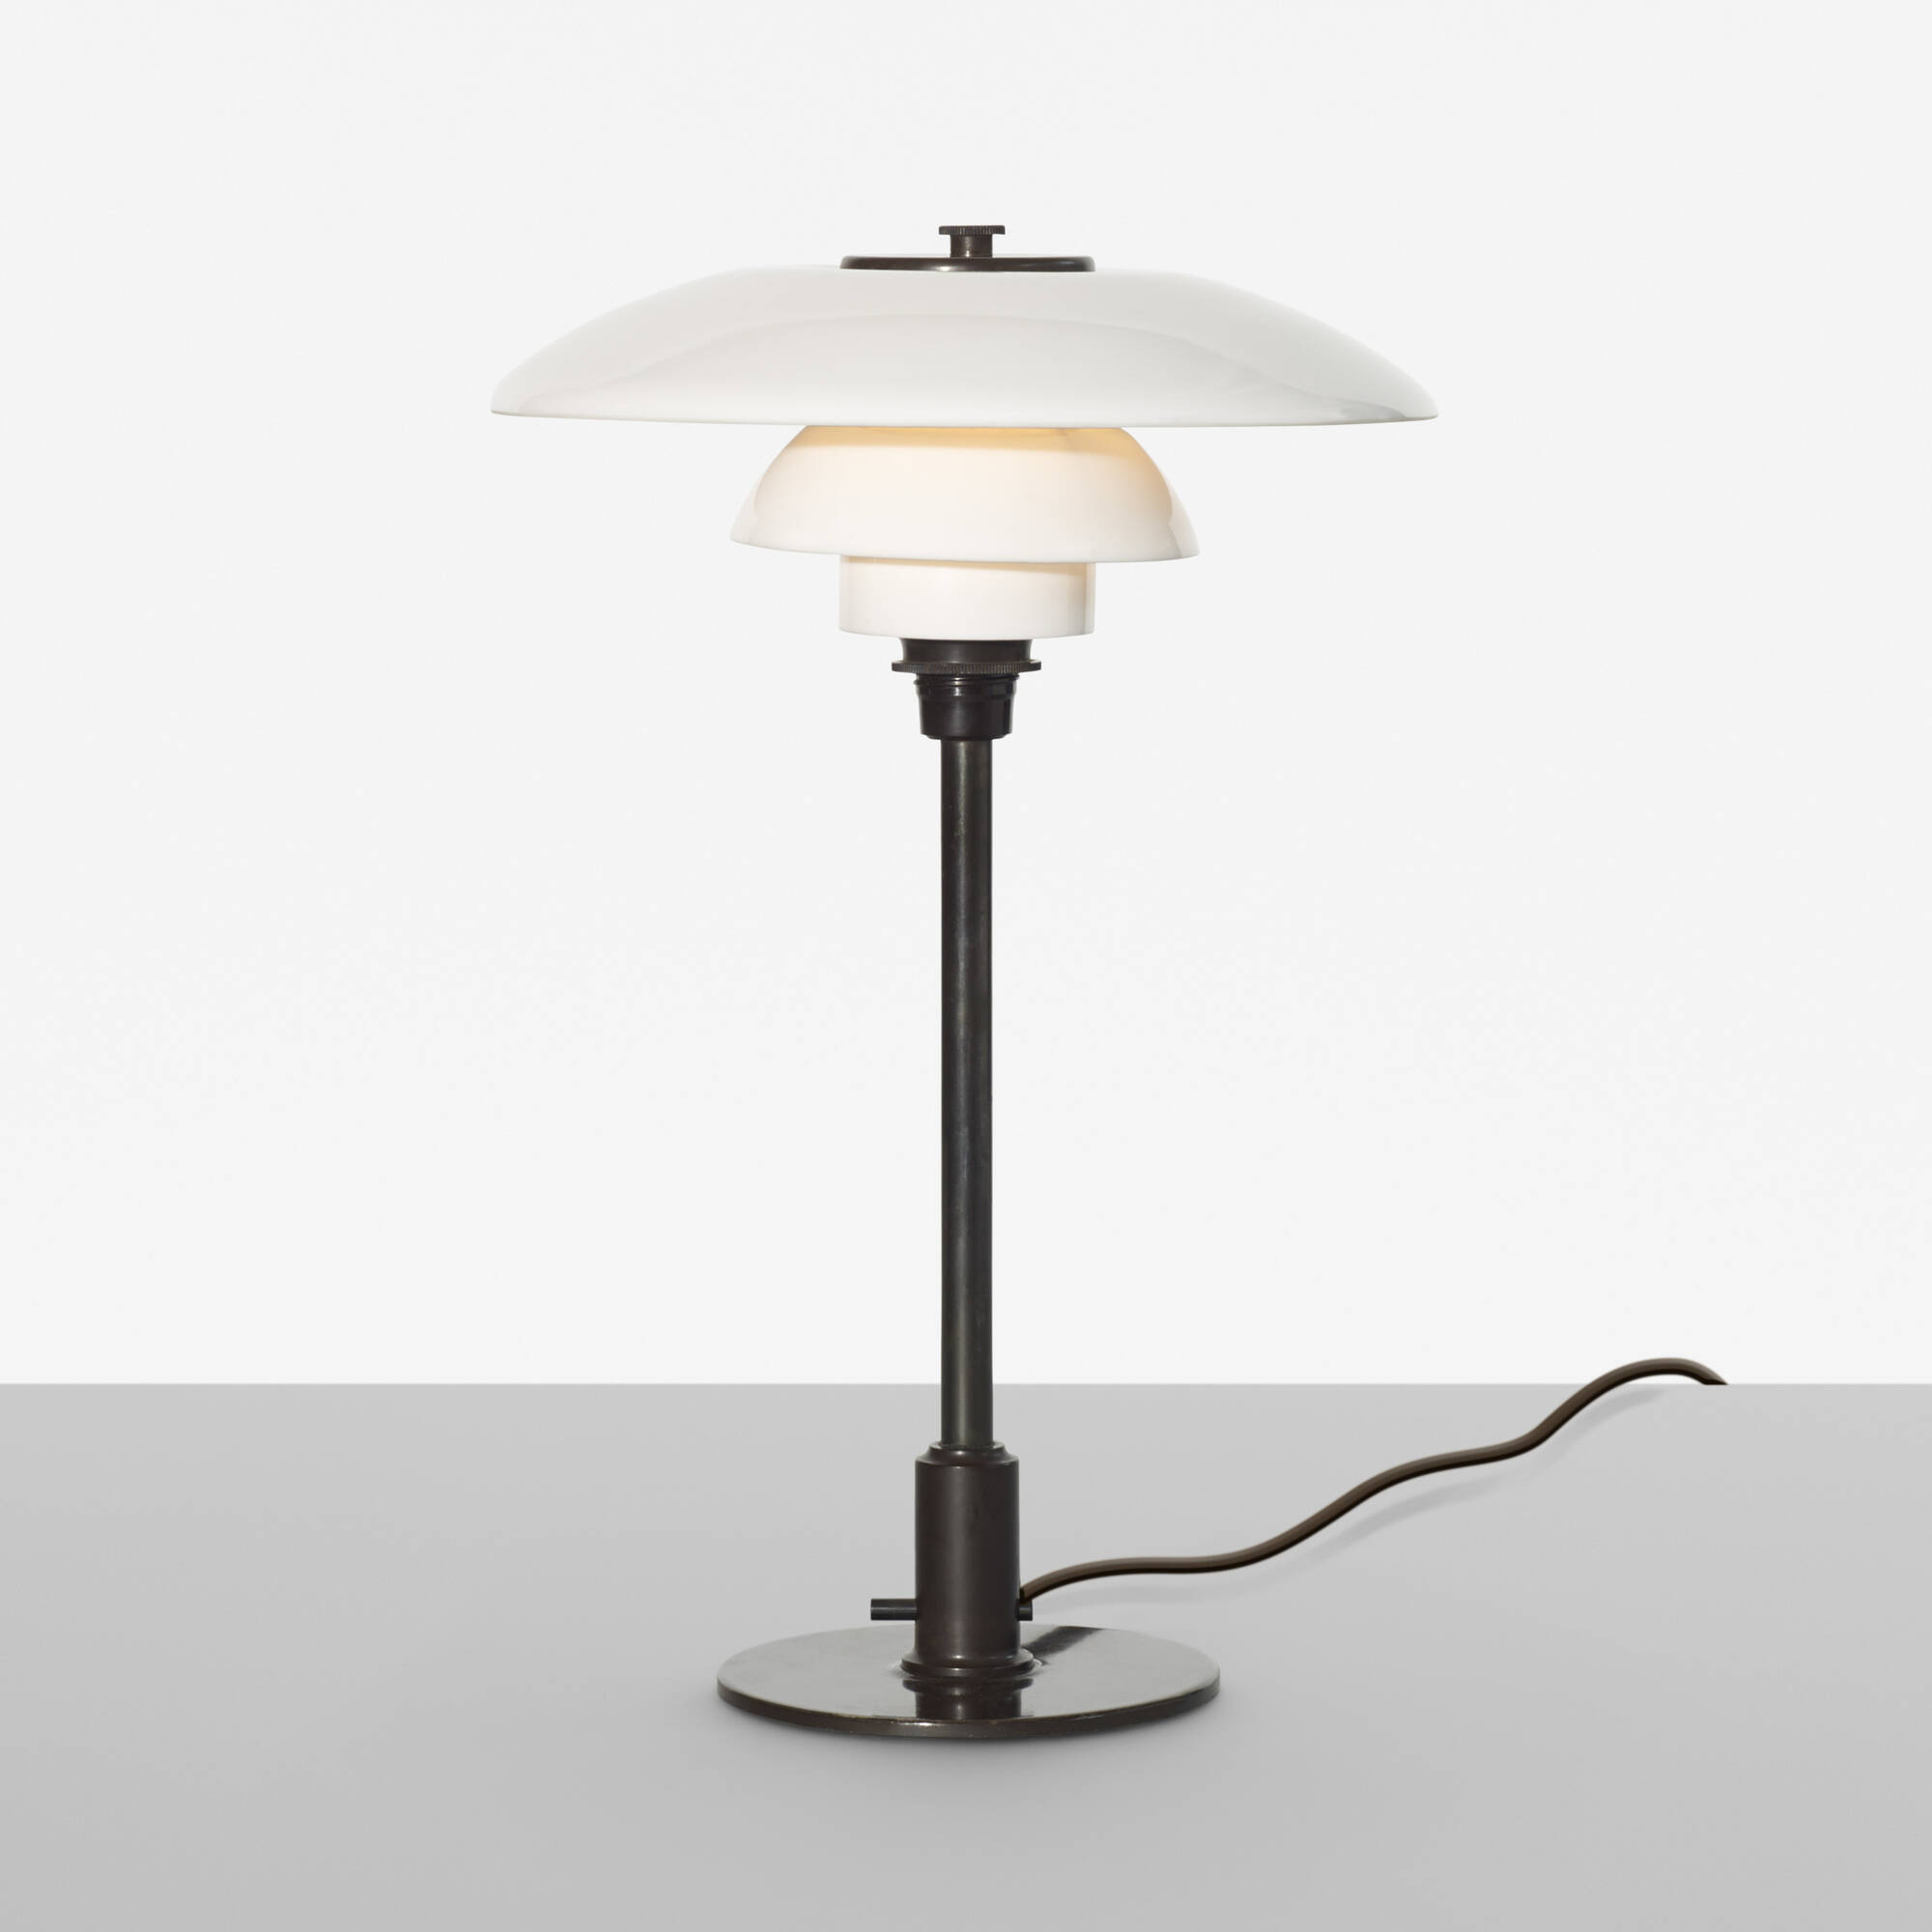 365 Poul Henningsen Ph 3 2 Table Lamp Scandinavian Design 8 May 14 Auctions Wright Auctions Of Art And Design